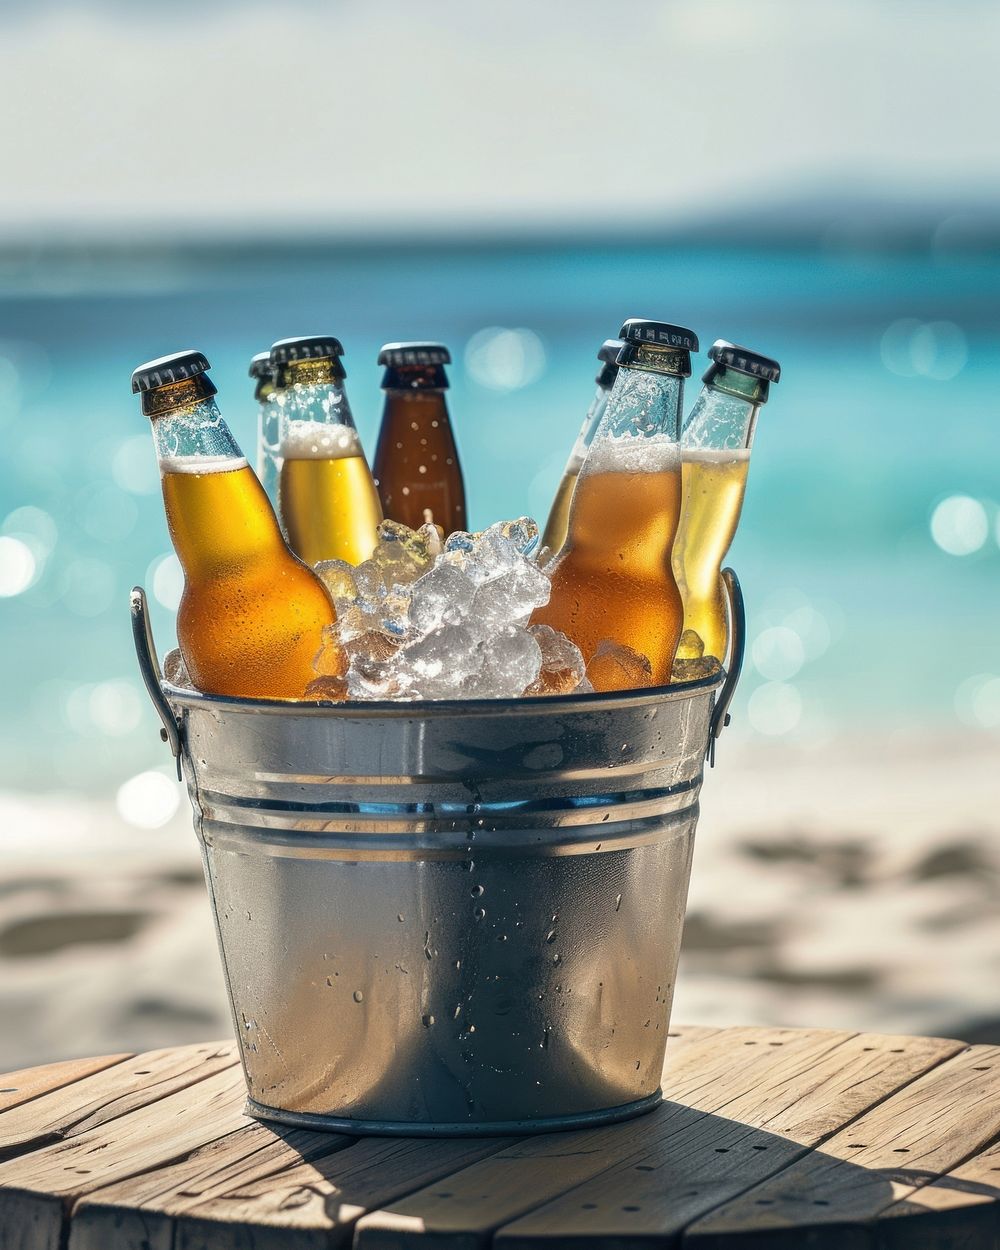 Assorted beer bottles in a metal bucket full of ice put on wood table against beach view vacation summer drink.